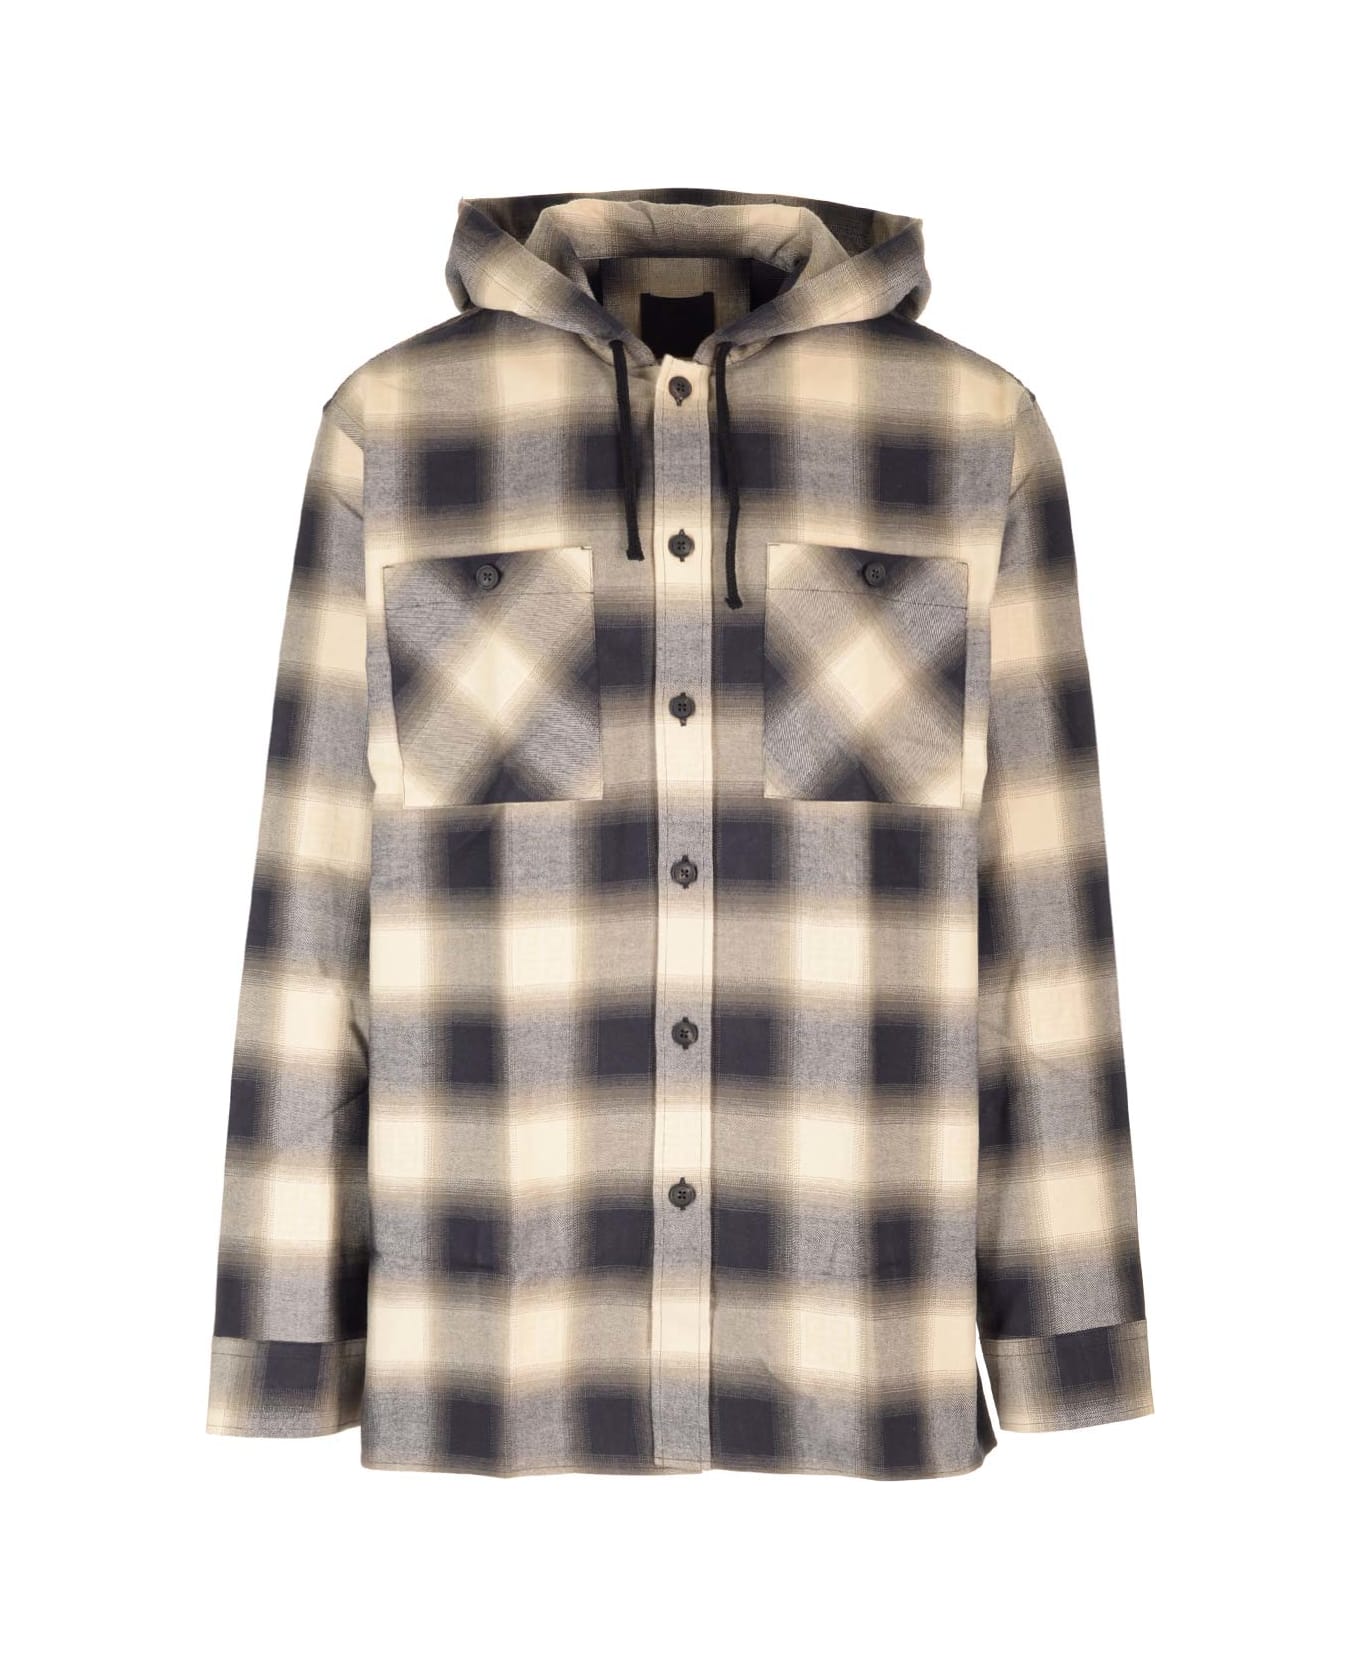 Givenchy Hooded Shirt - Multicolor